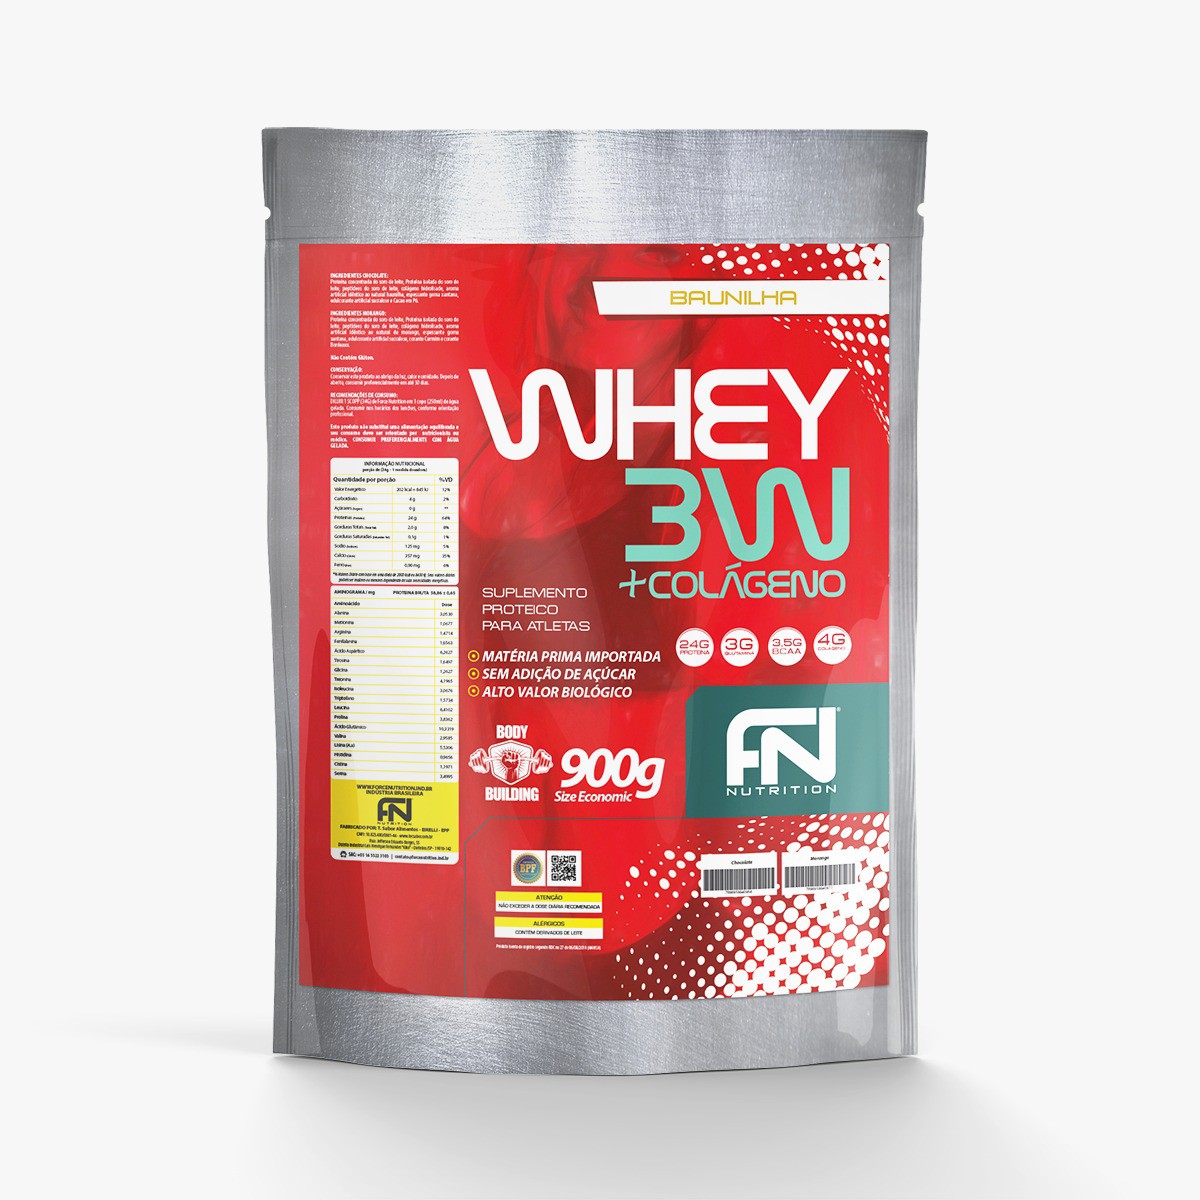 WHEY PROTEIN 3W + COLÁGENO 900G REFIL - Force Nutrition Labs